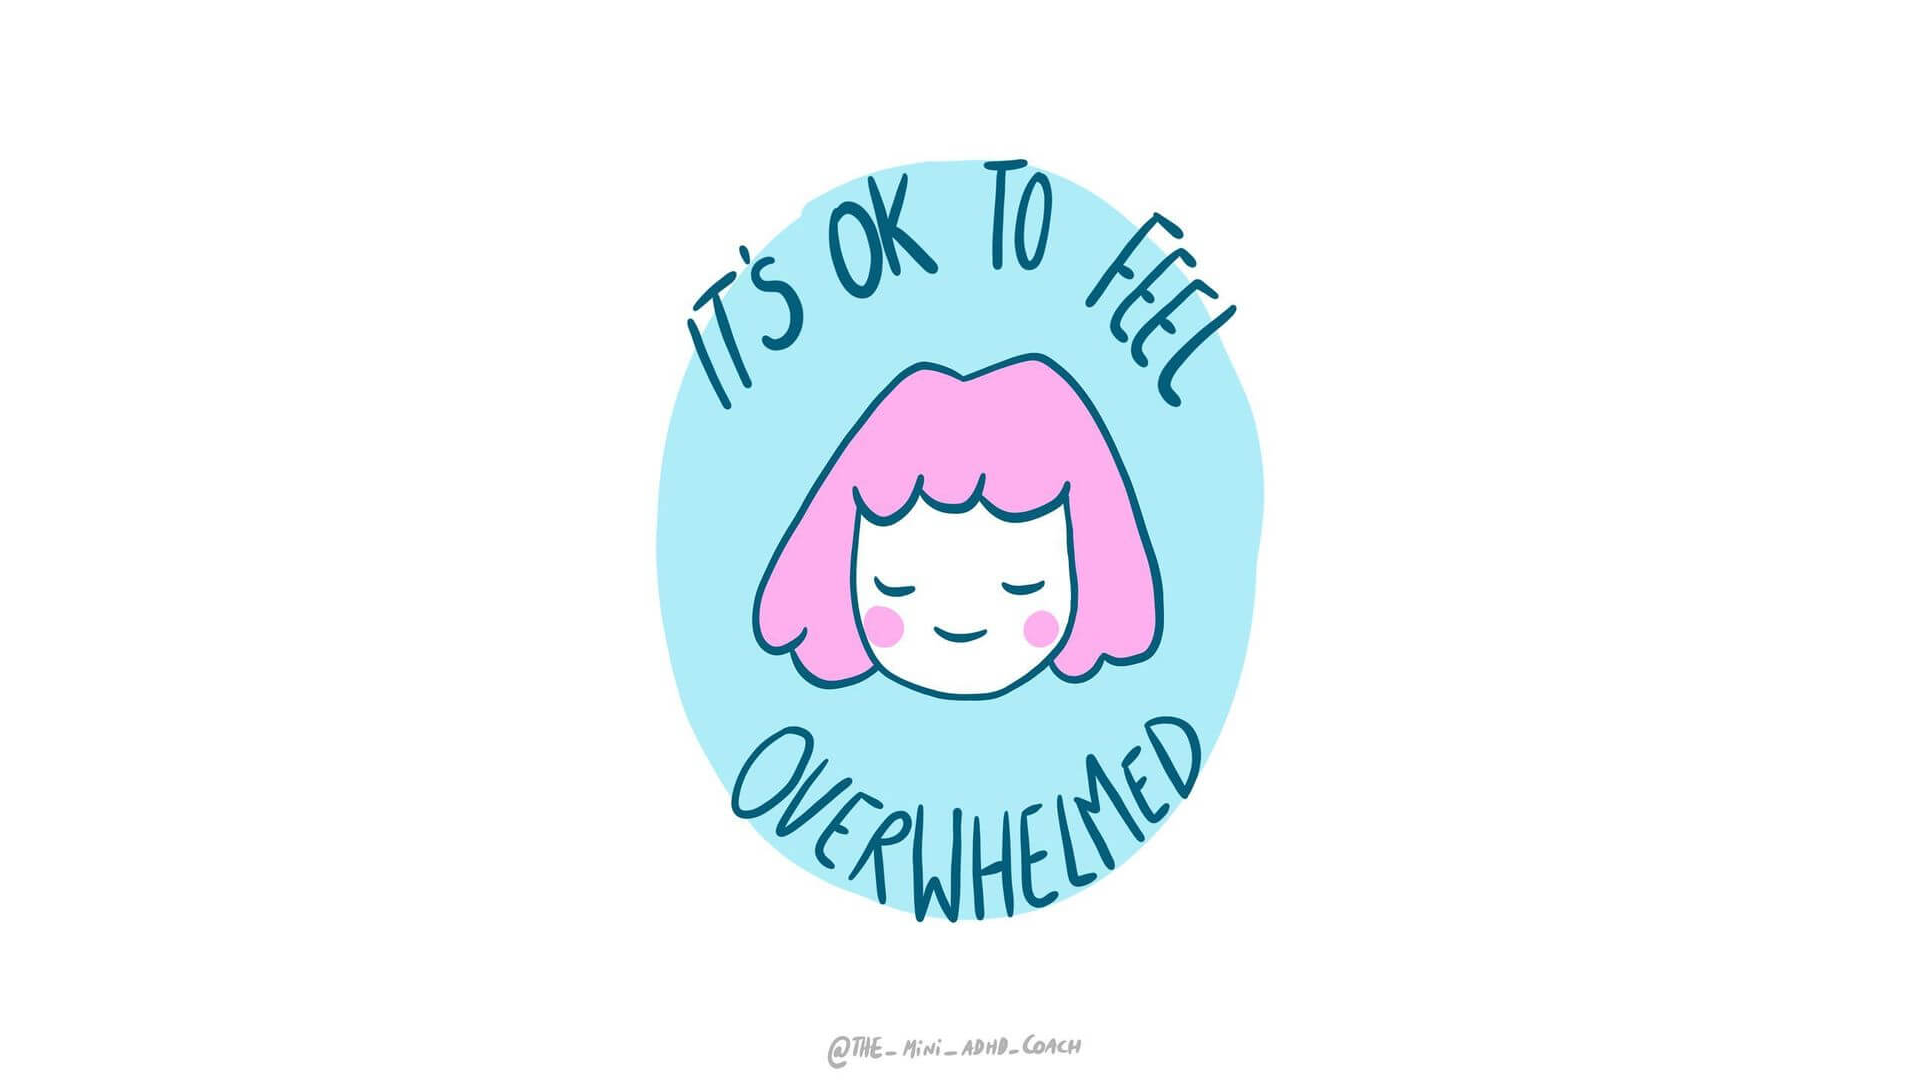 Instagram artwork by @the_mini_adhd_coach. A girl with pink hair in the centre over a blue circle background. The words read: 'it's ok to feel overwhelmed'.